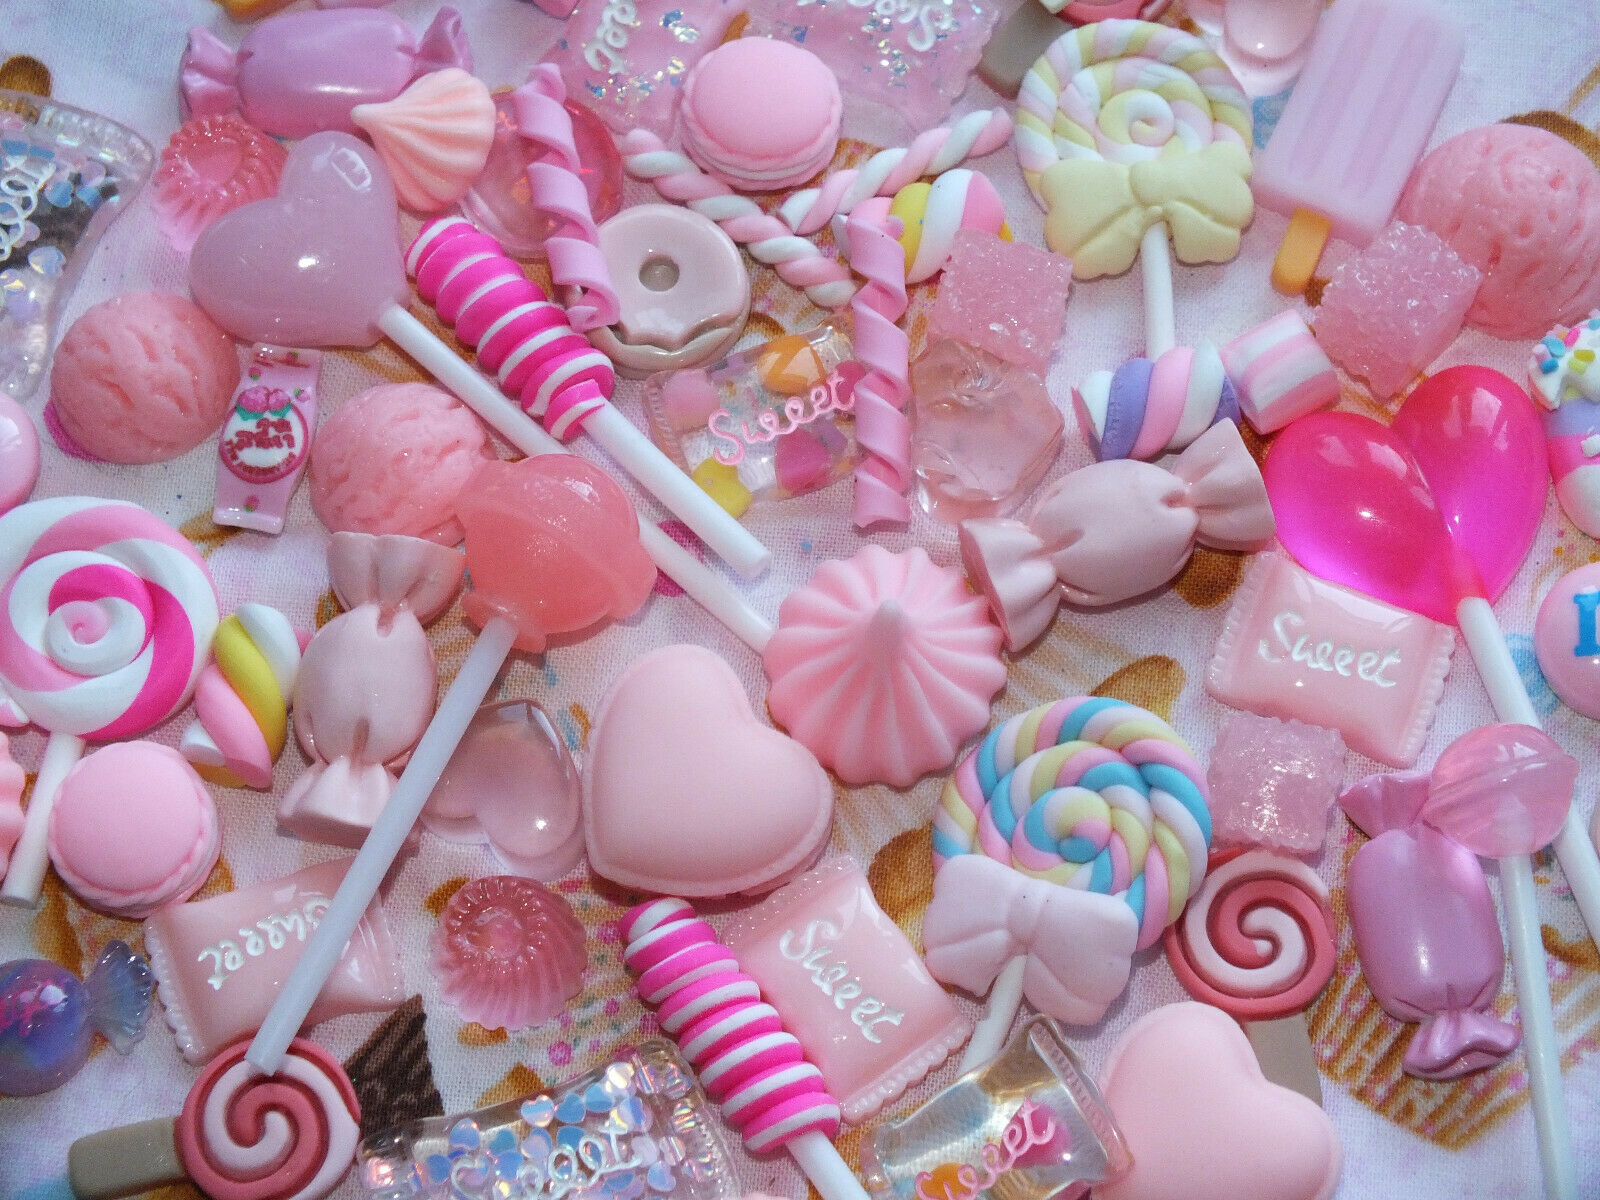 10PCS Slime Charms With Donut Candy Sugar Chocolate Cake Resin